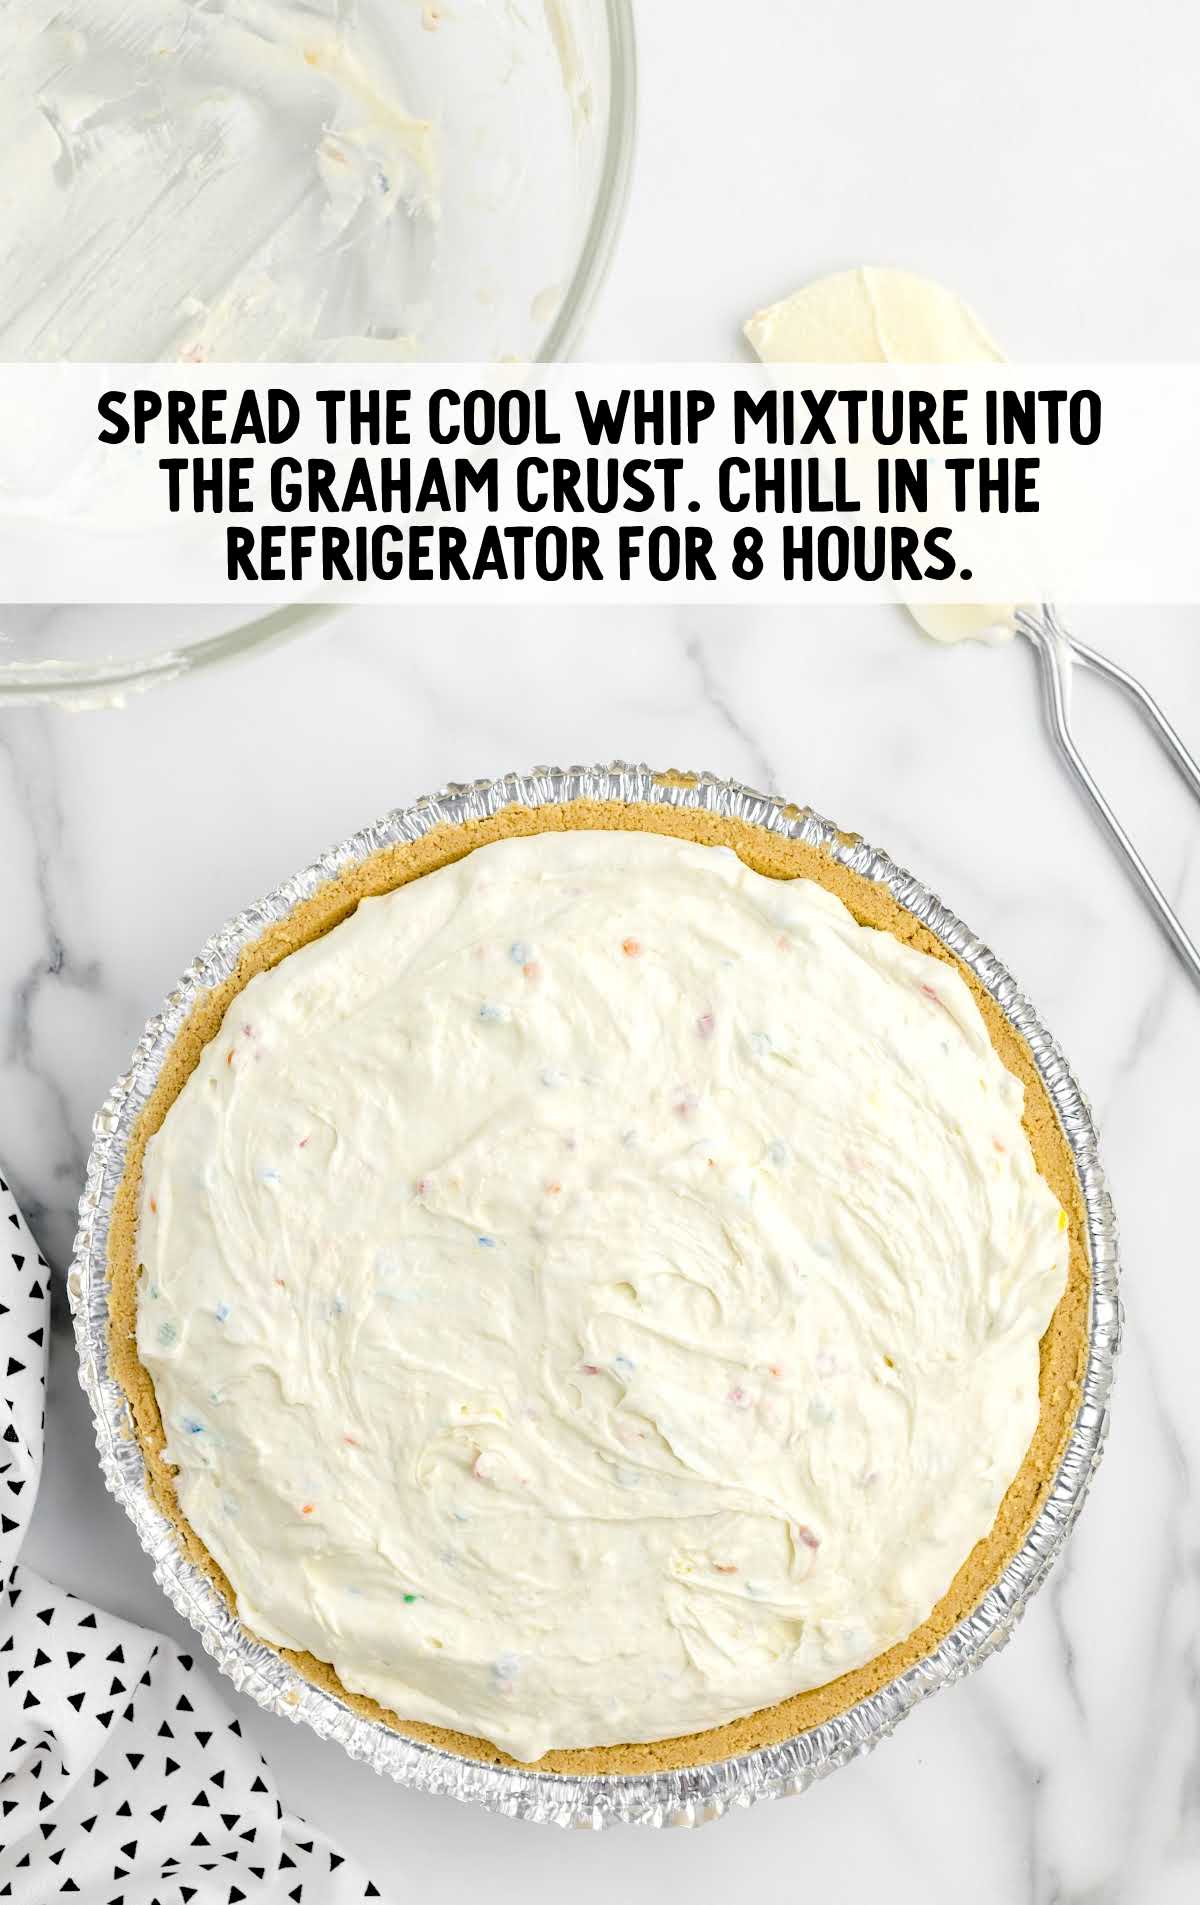 Cool Whip mixture spread into the pre-made graham cracker crust